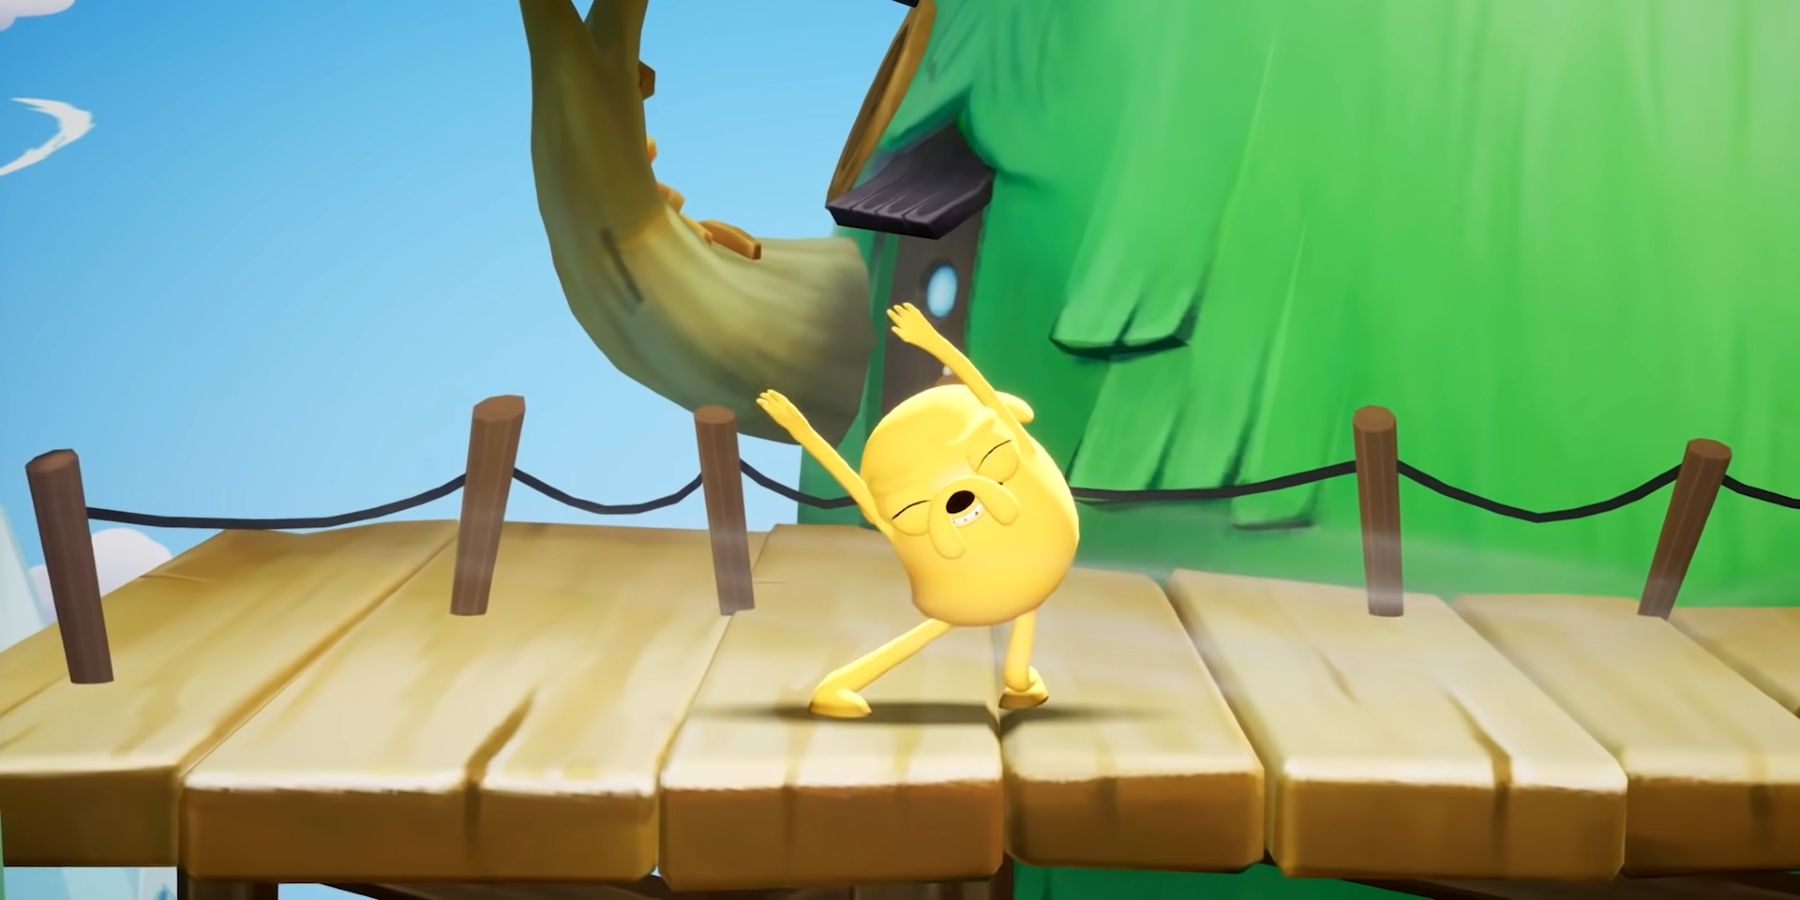 Jake The Dog dancing at the treehouse in MultiVersus